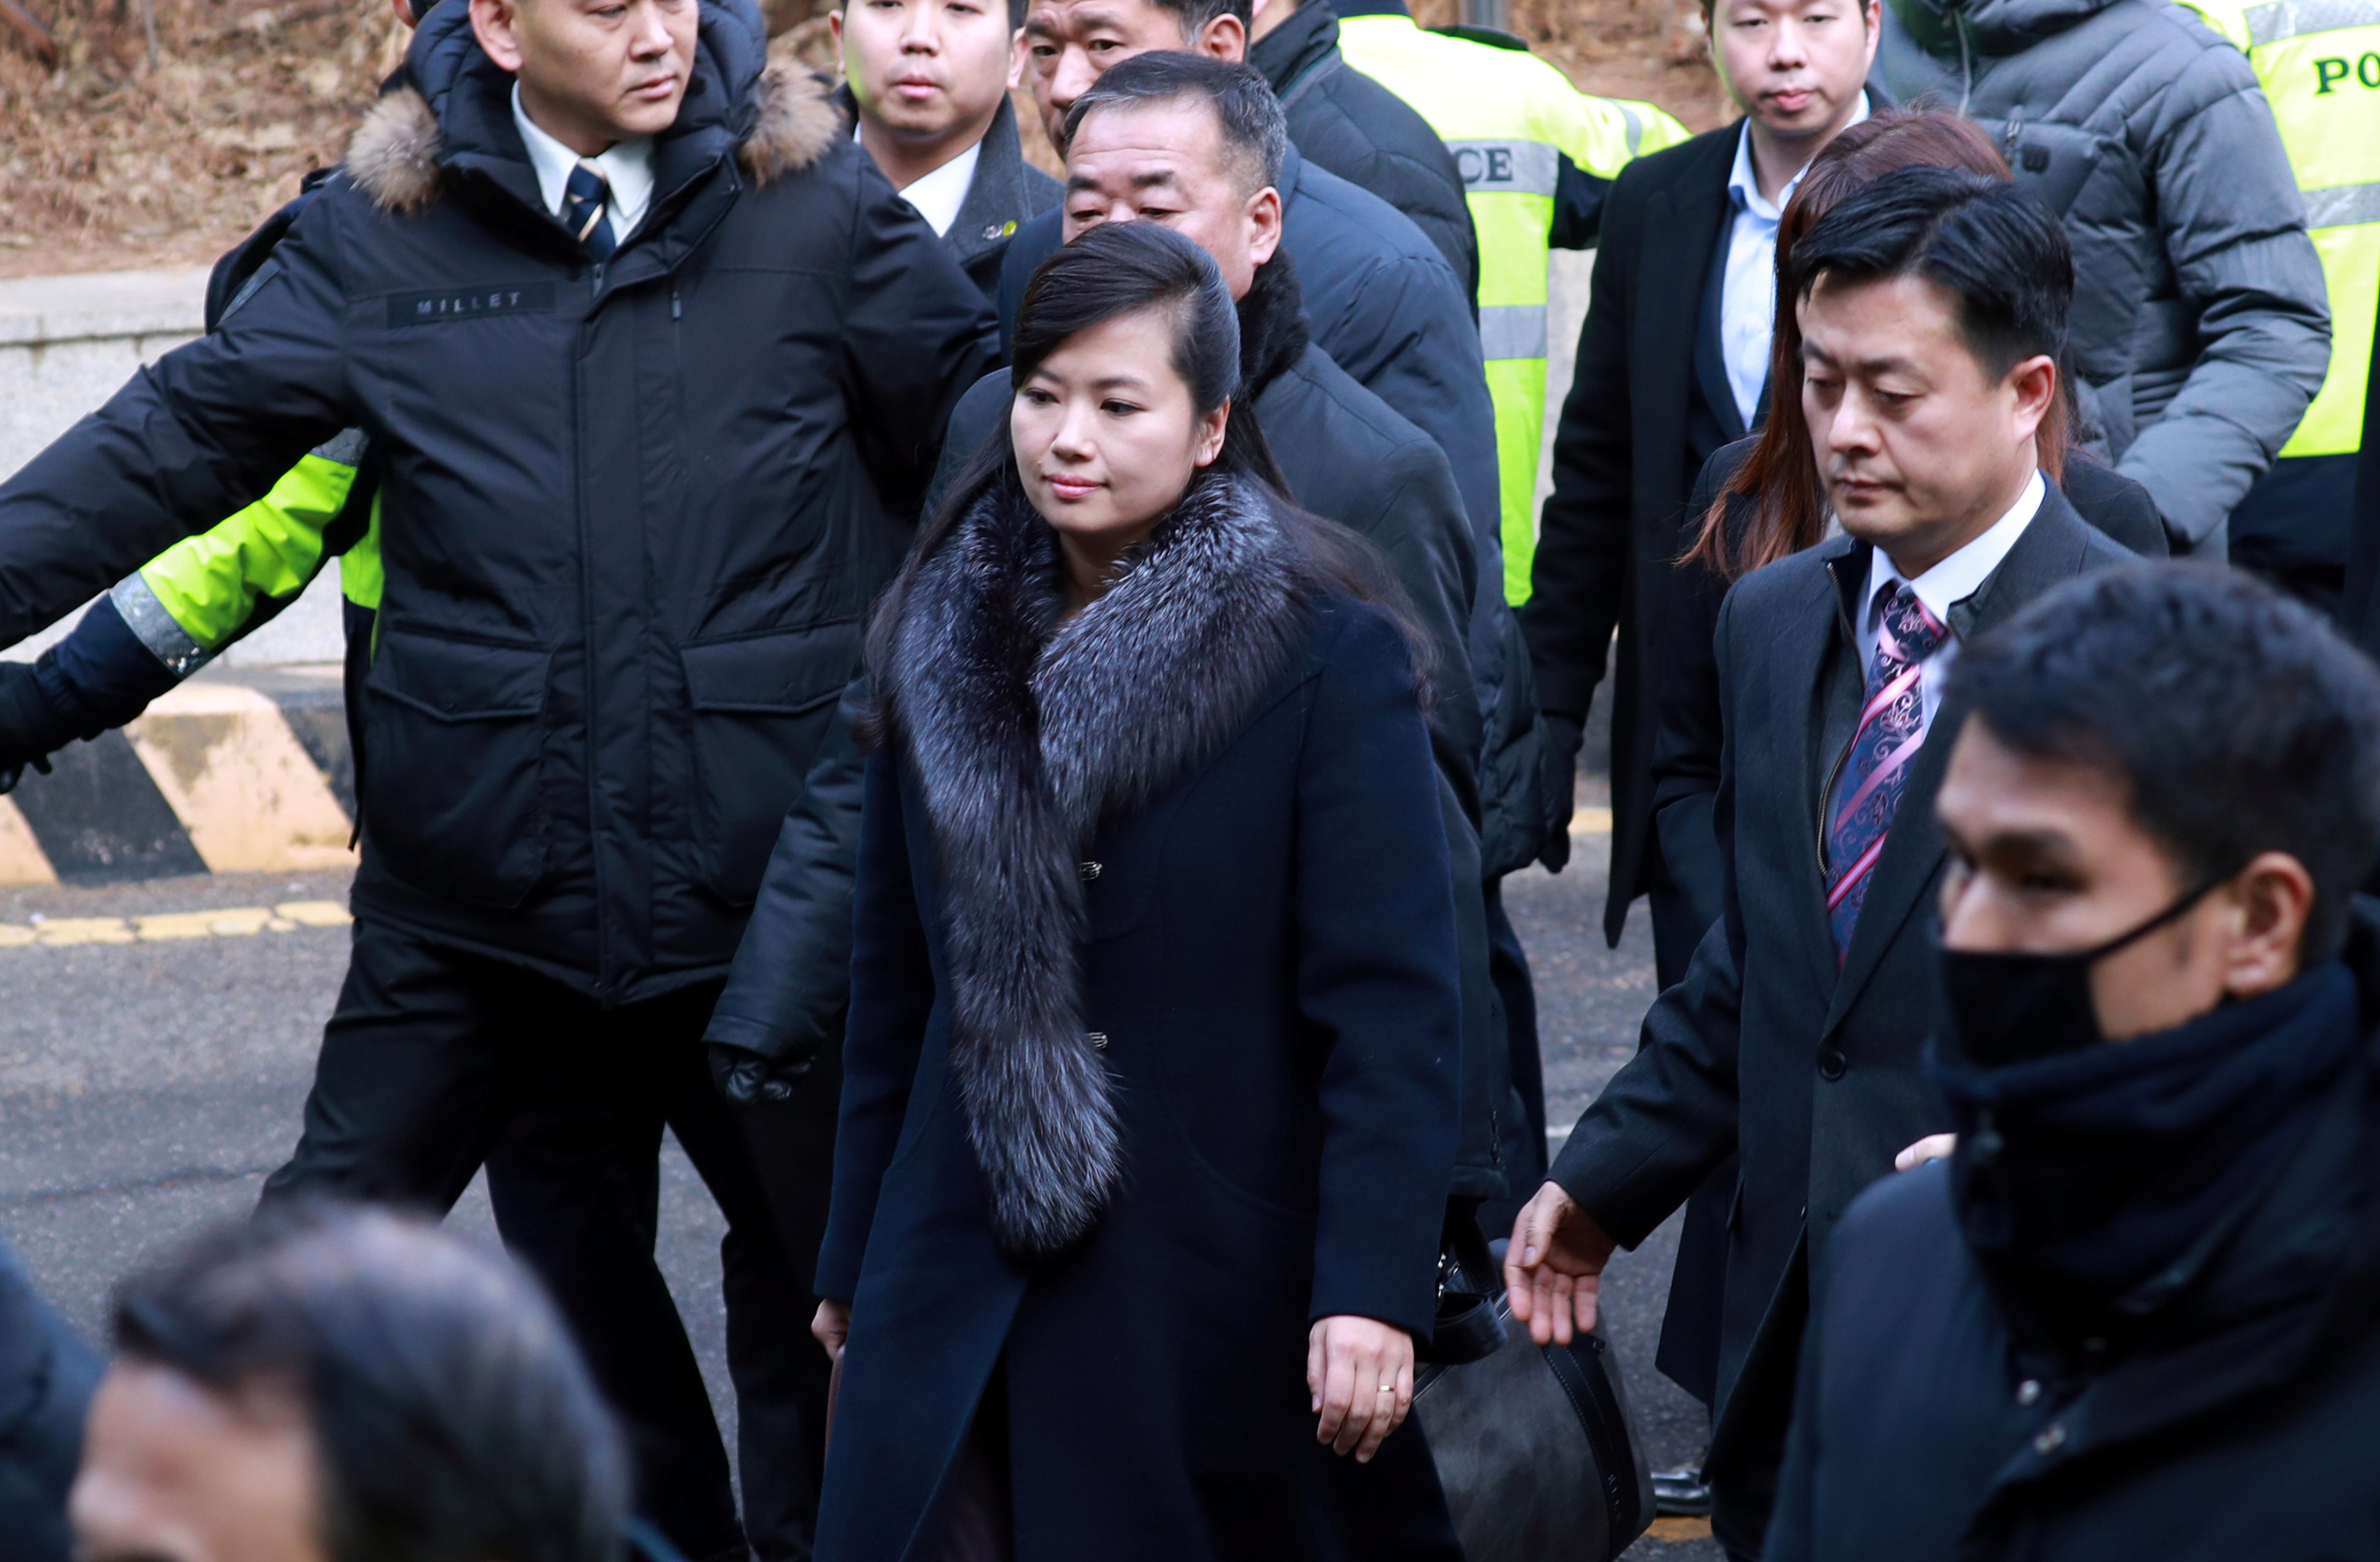 Hyon Song Wol, head of North Korea's Samjiyon Orchestra, arrives at a railway station in Seoul, South Korea, January 21, 2017.   Shin Joon-hee/Yonhap via REUTERS   ATTENTION EDITORS - THIS IMAGE HAS BEEN SUPPLIED BY A THIRD PARTY. SOUTH KOREA OUT. NO RESALES. NO ARCHIVE.